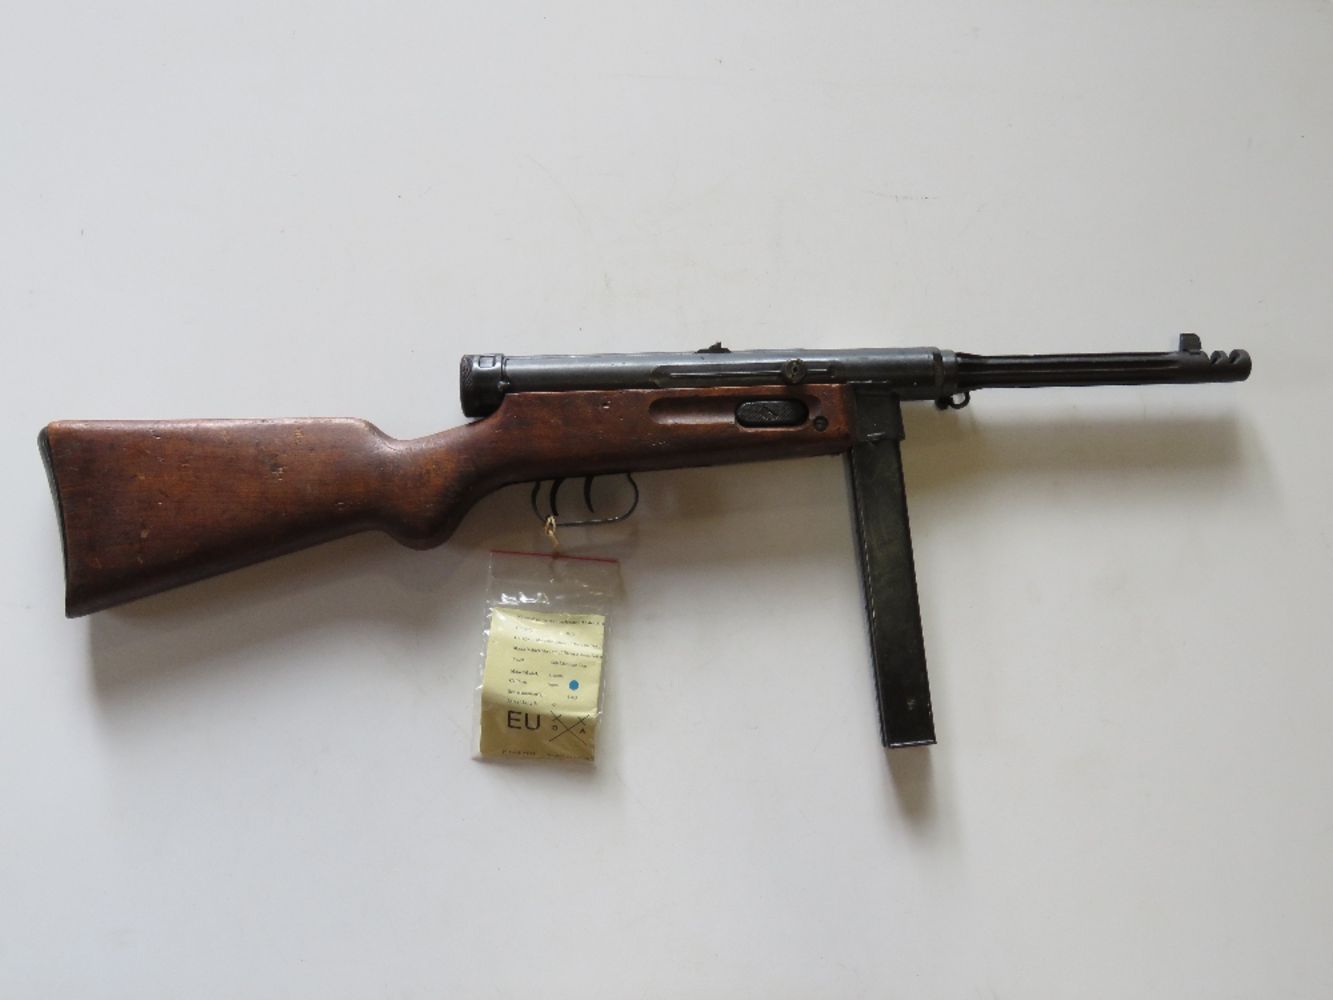 International Militaria; Deactivated Weapons Sale - Timed Online Only Auction